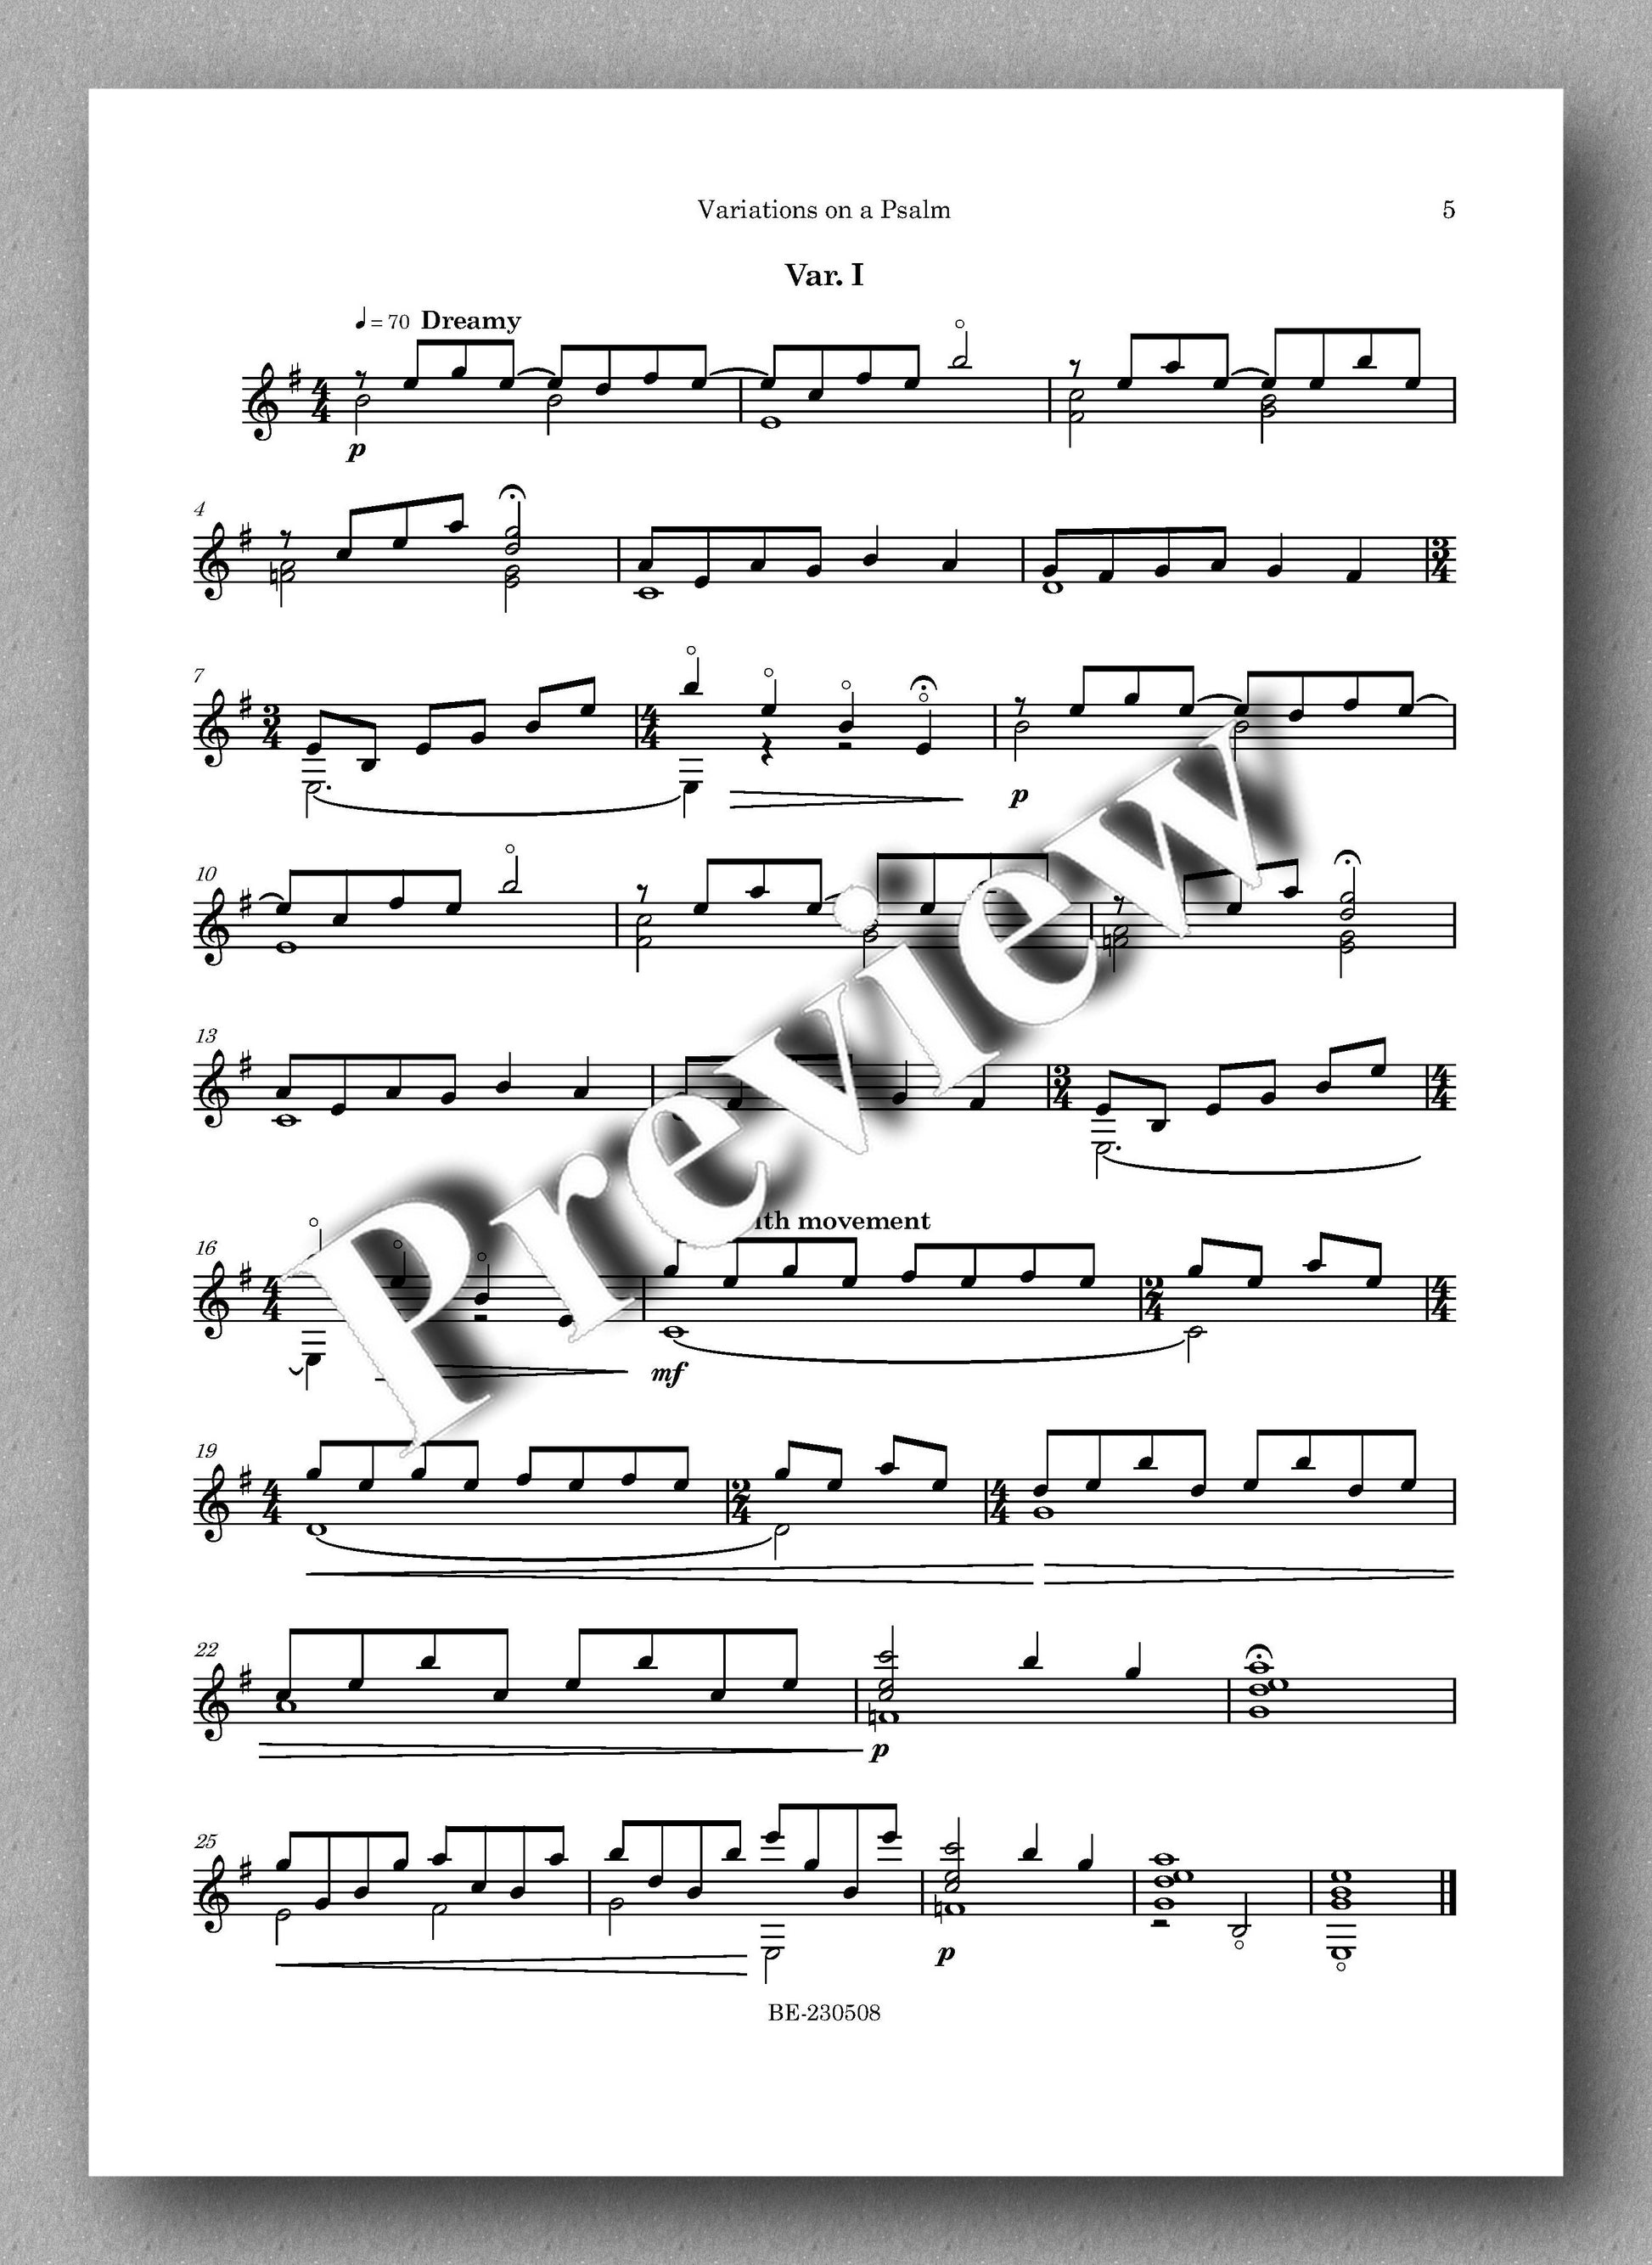 Variations on a Psalm by Rick Doornbos - preview of the music score 2